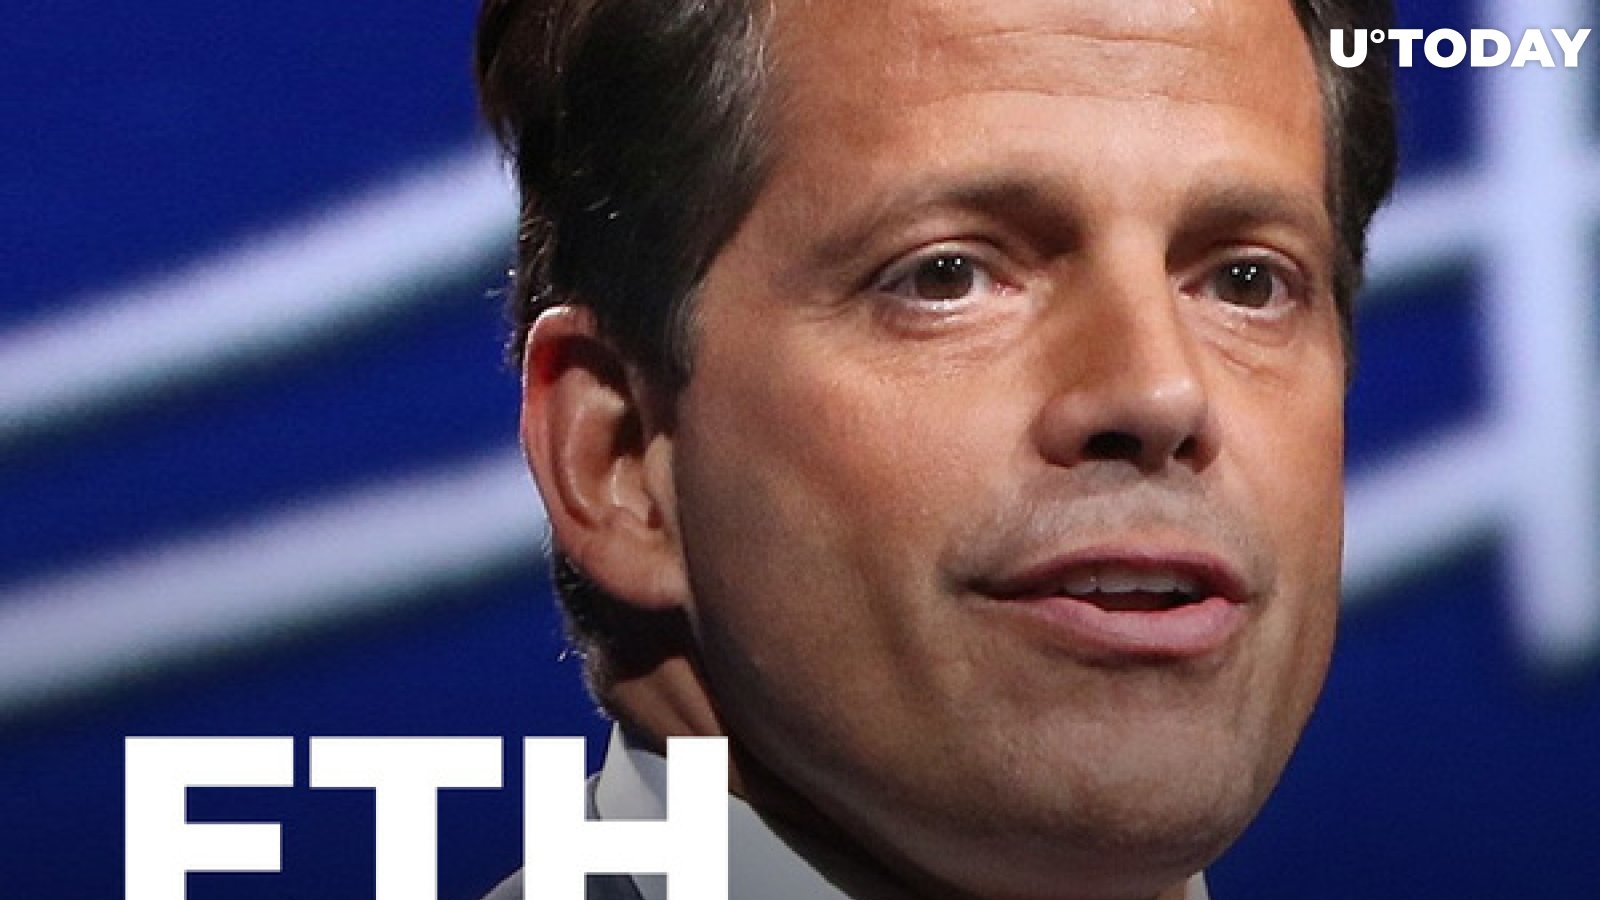 Ethereum Has Good Fundamentals And It Will Grow: Anthony Scaramucci